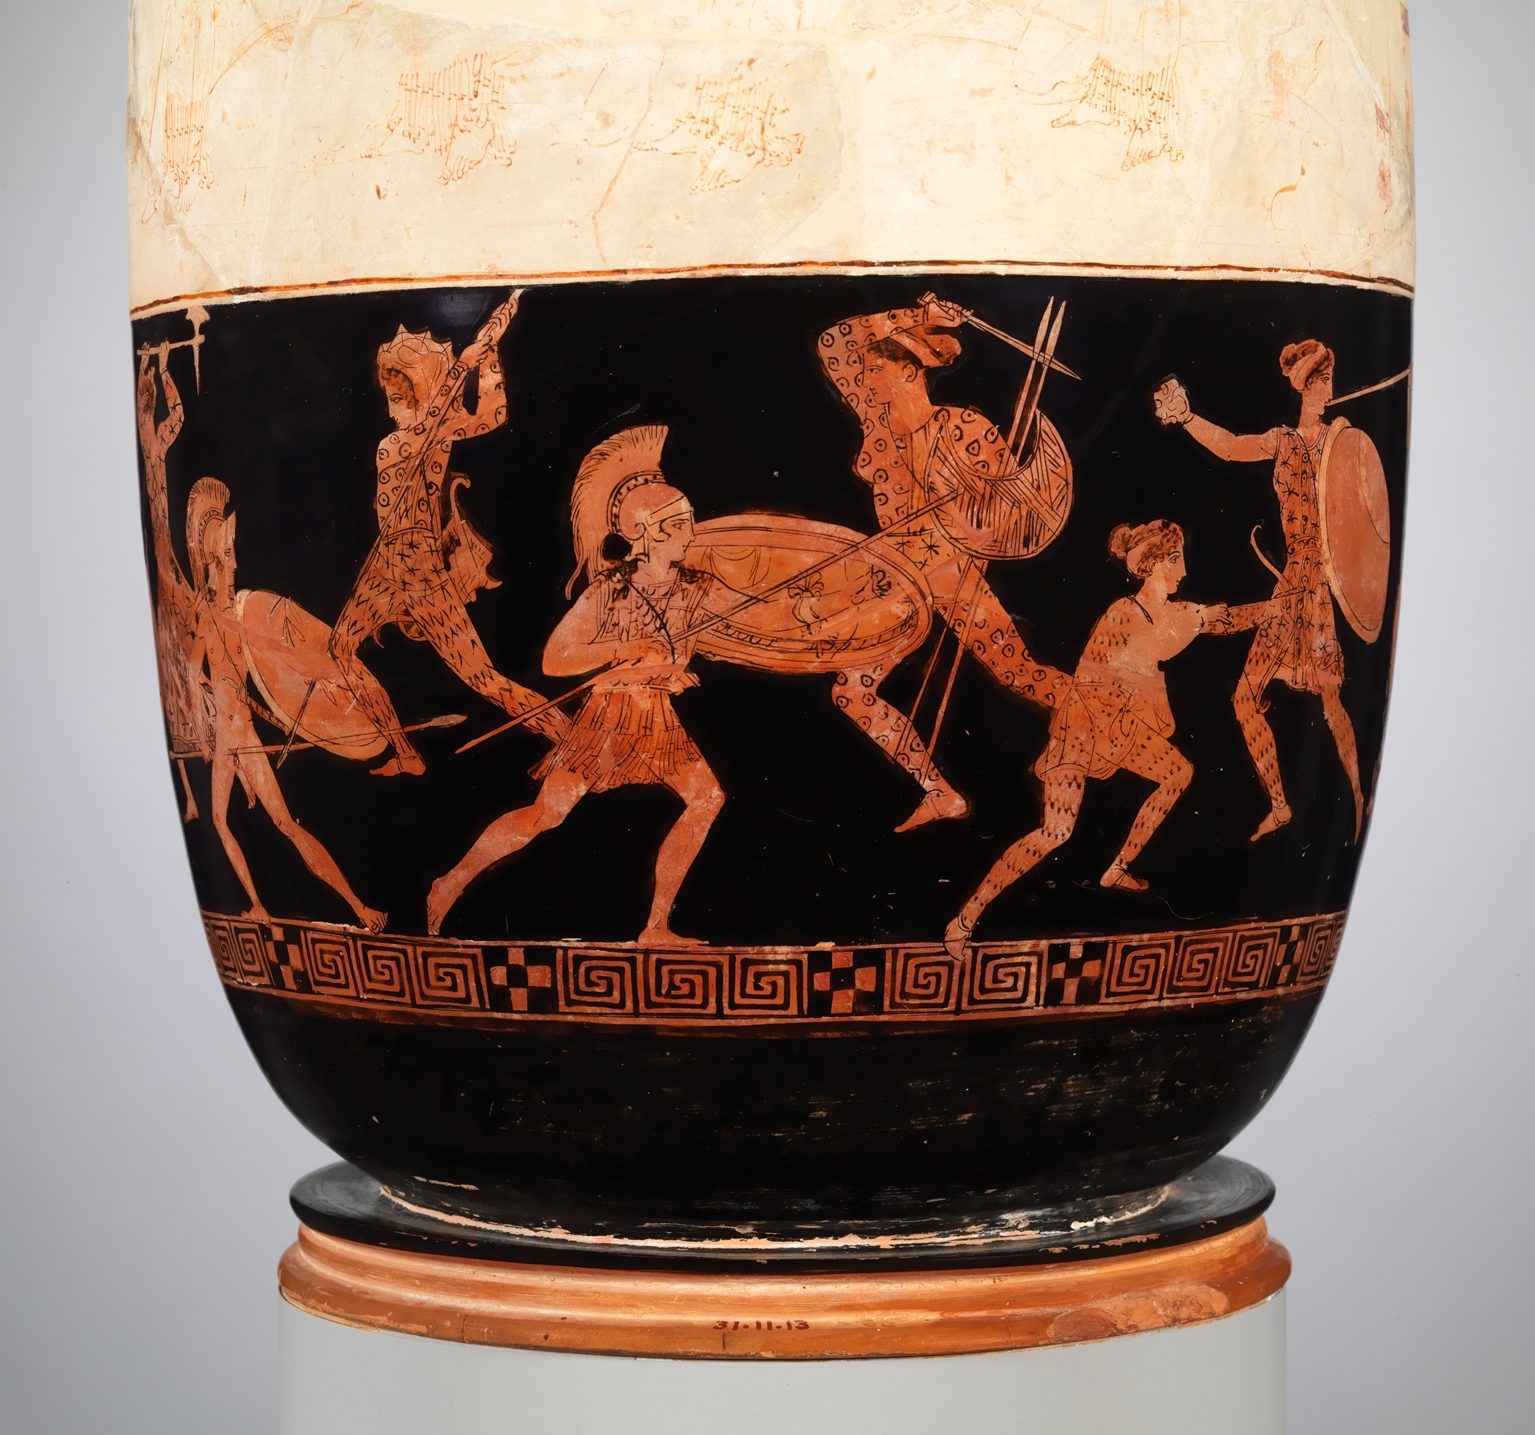 Two Greeks, with plumed helms, round shields, tunics, and spears, fight 4 Amazons. The amazons carry crescent-shaped shields and fight with swords, and are dressed in hats and patterned body suits.